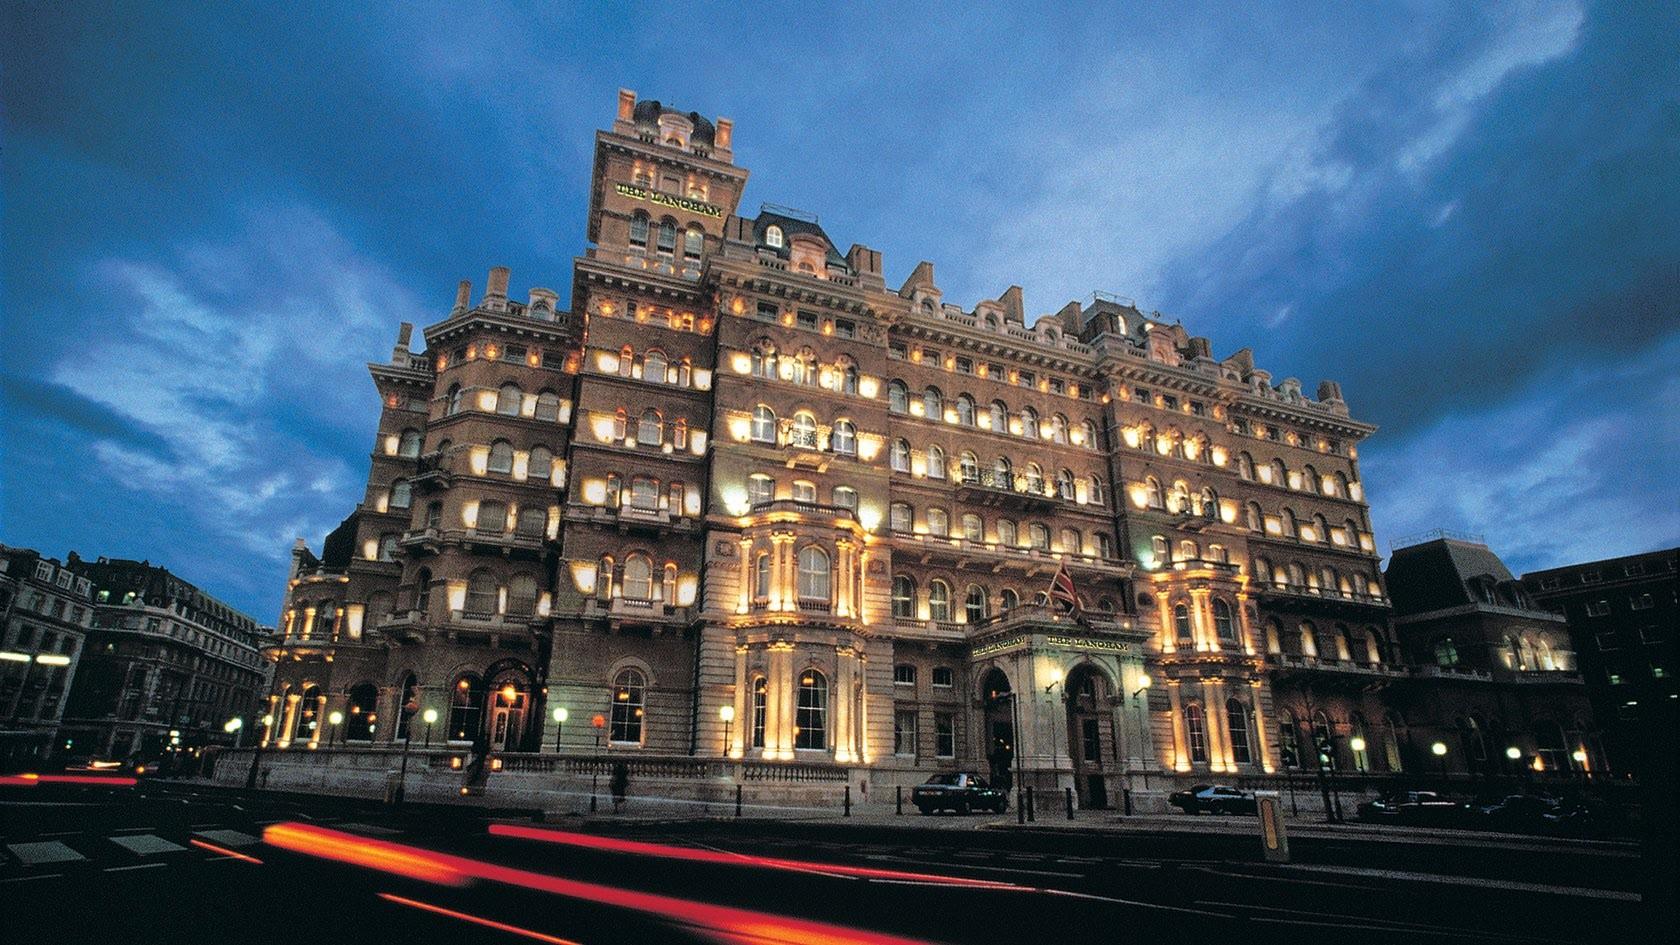 The 5 star Langham Hotel founded in 1865 and located in Regent Street was quite an arhitectual challenge